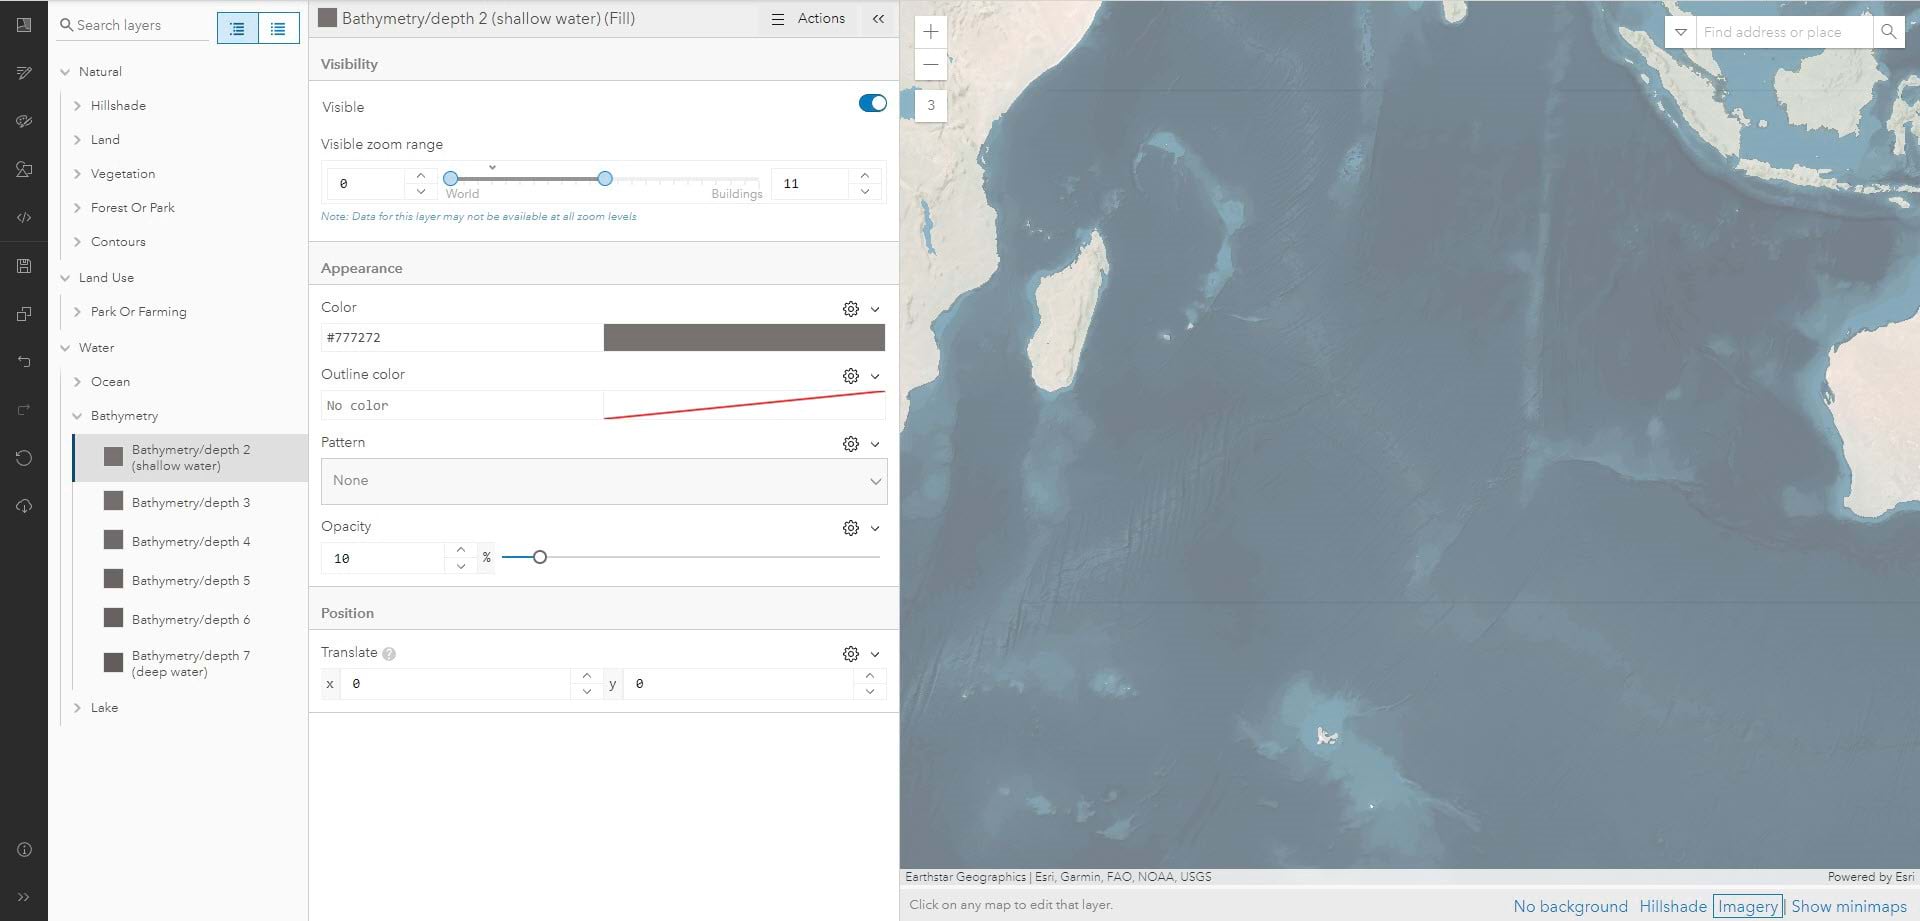 Vector Tile Style Editor settings for Bathymetry Depth 2 and showing how it looks draped with imagery.